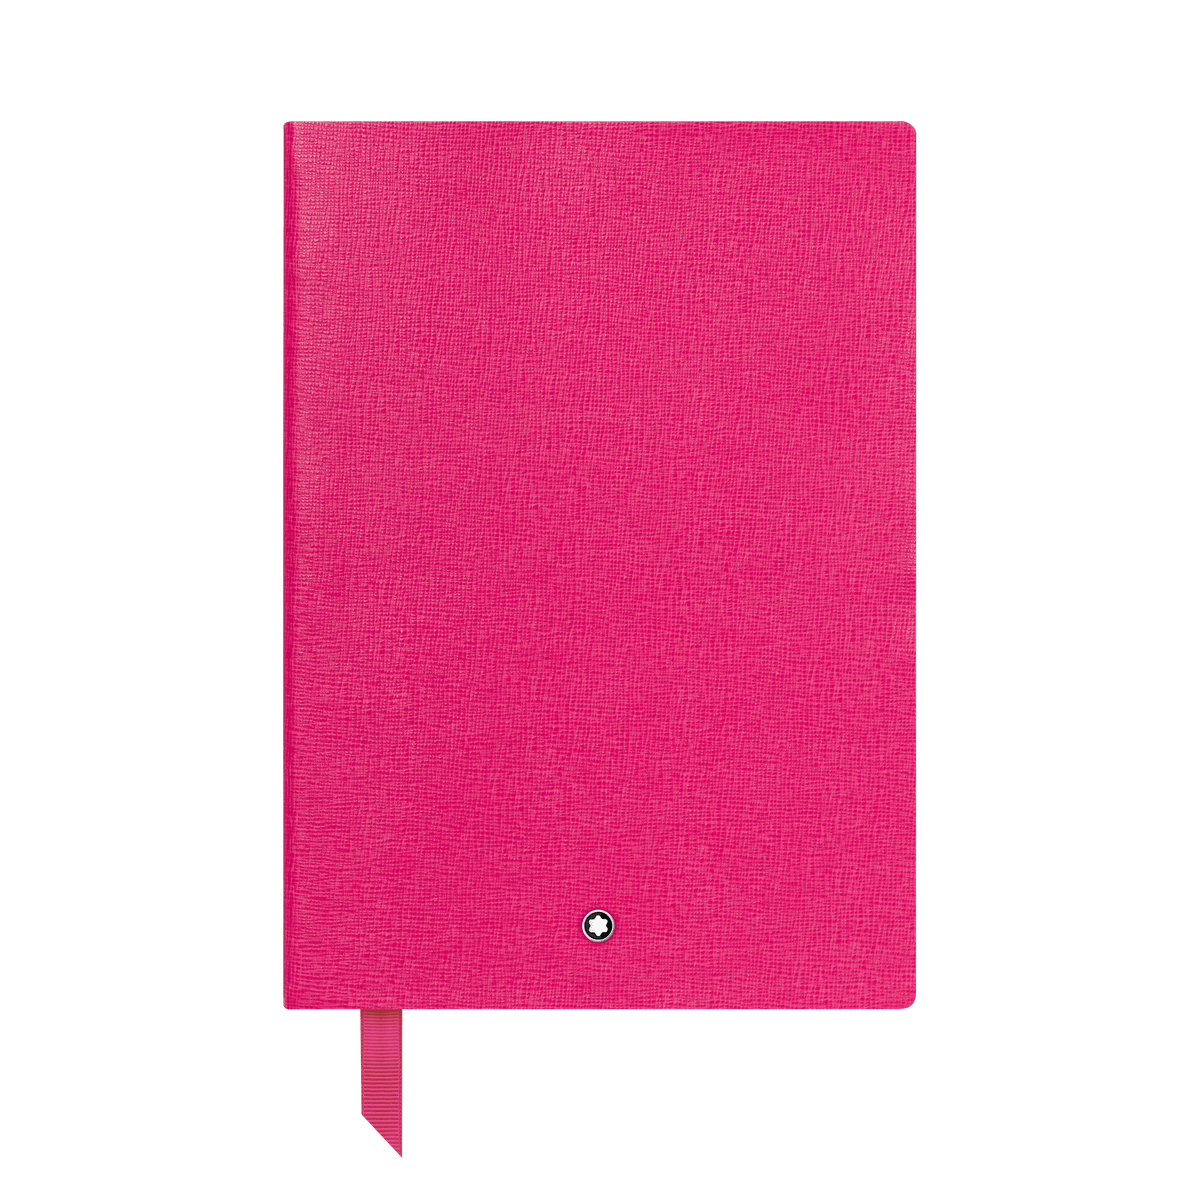 Montblanc Fine Stationery Notebook #146 Pink, Lined